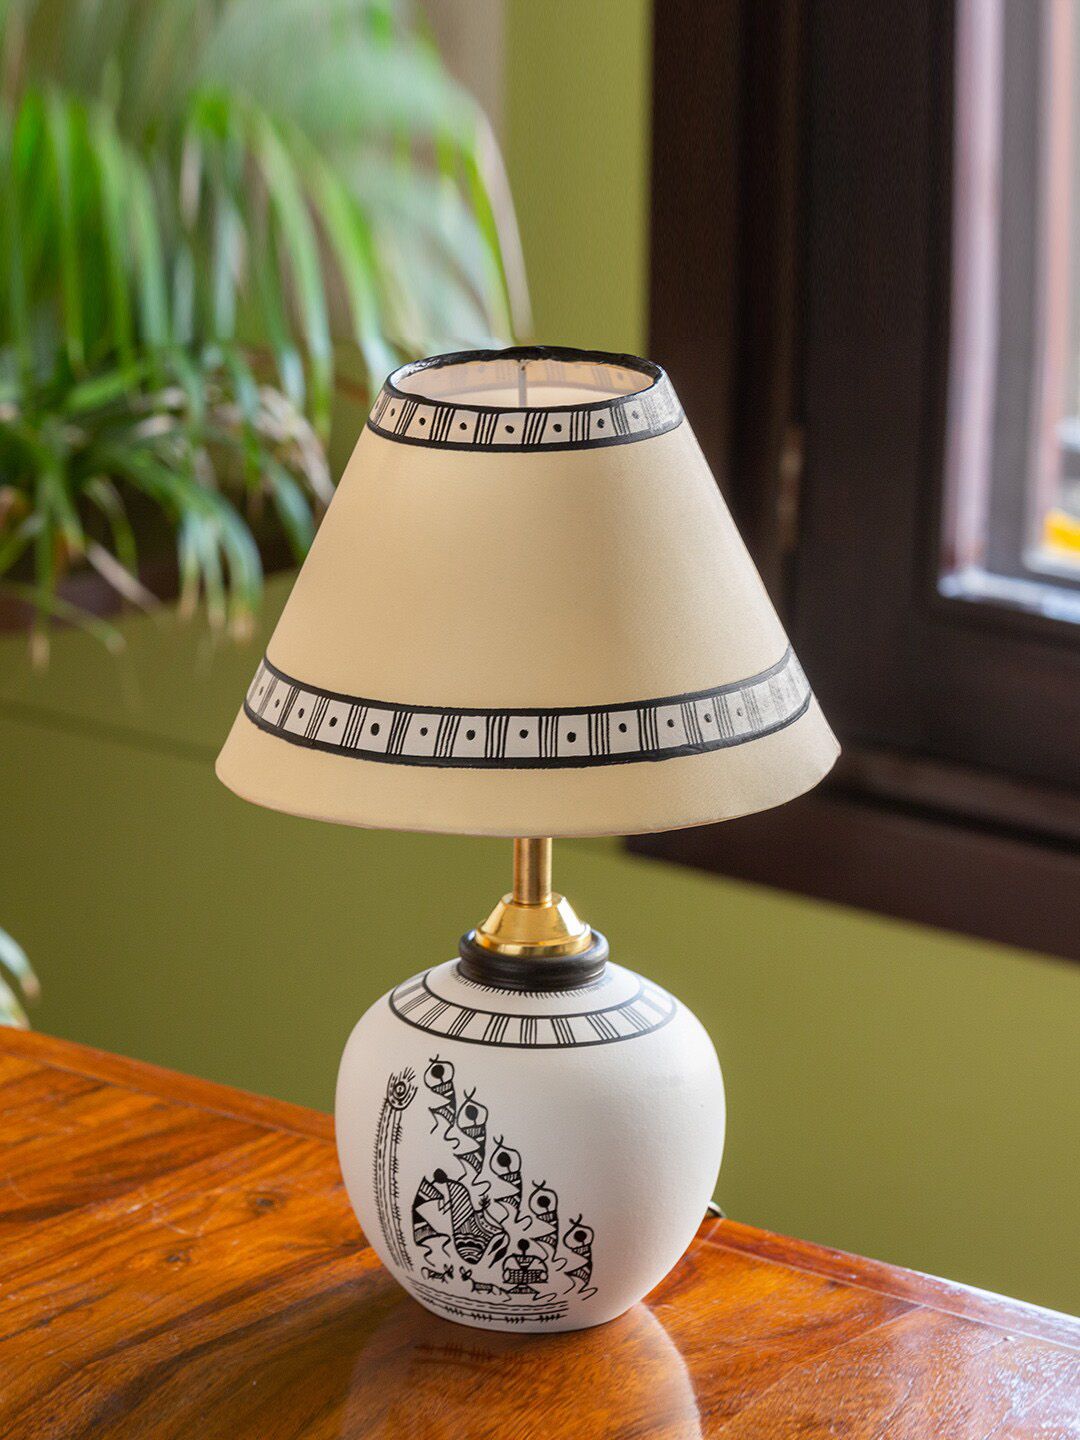 ExclusiveLane Off-White & Black Hand-Painted Terracotta Table Lamp Price in India